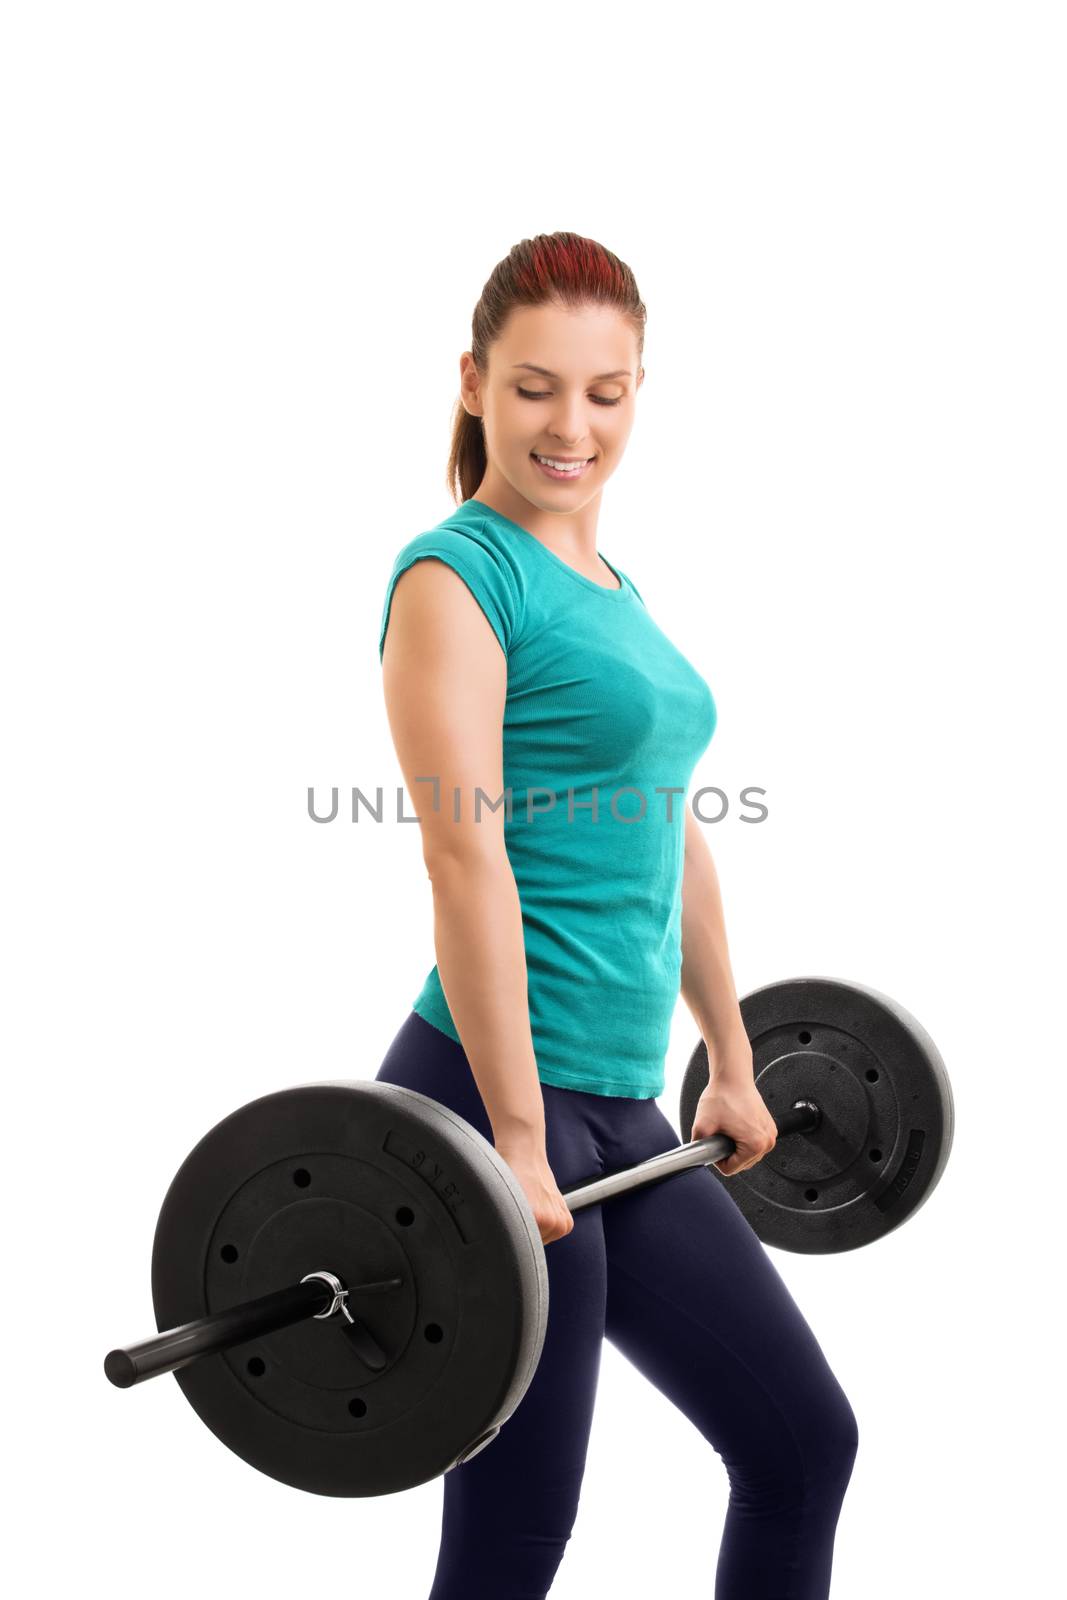 Work it, feel it, love it. It's your figure. Beautiful young girl holding a barbell, isolated on white background. Ready for some deadlifts.